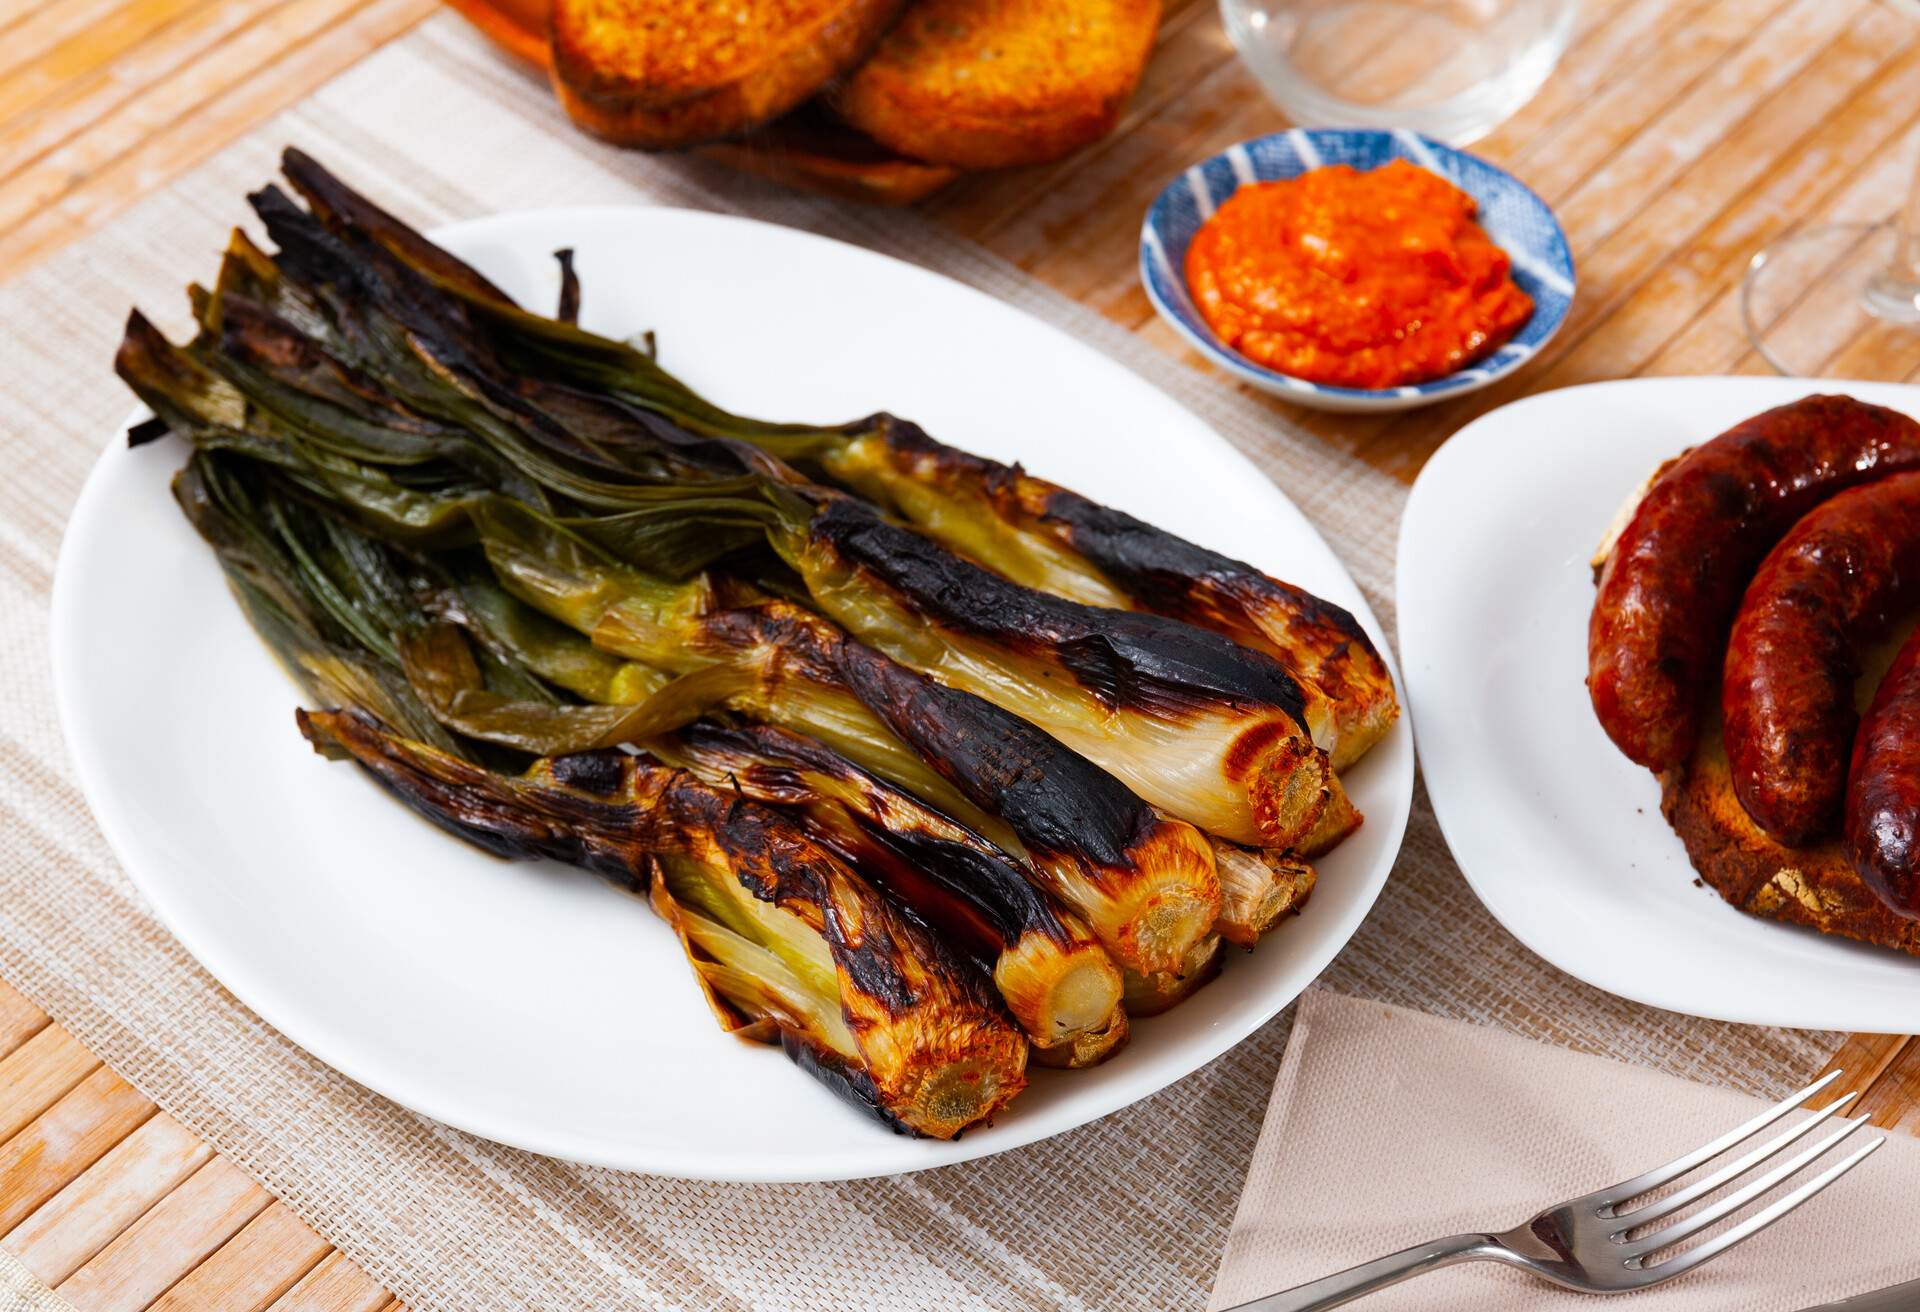 Succulent roasted calcots are enticingly served on a table alongside a flavorful romesco sauce and savoury botifarra.